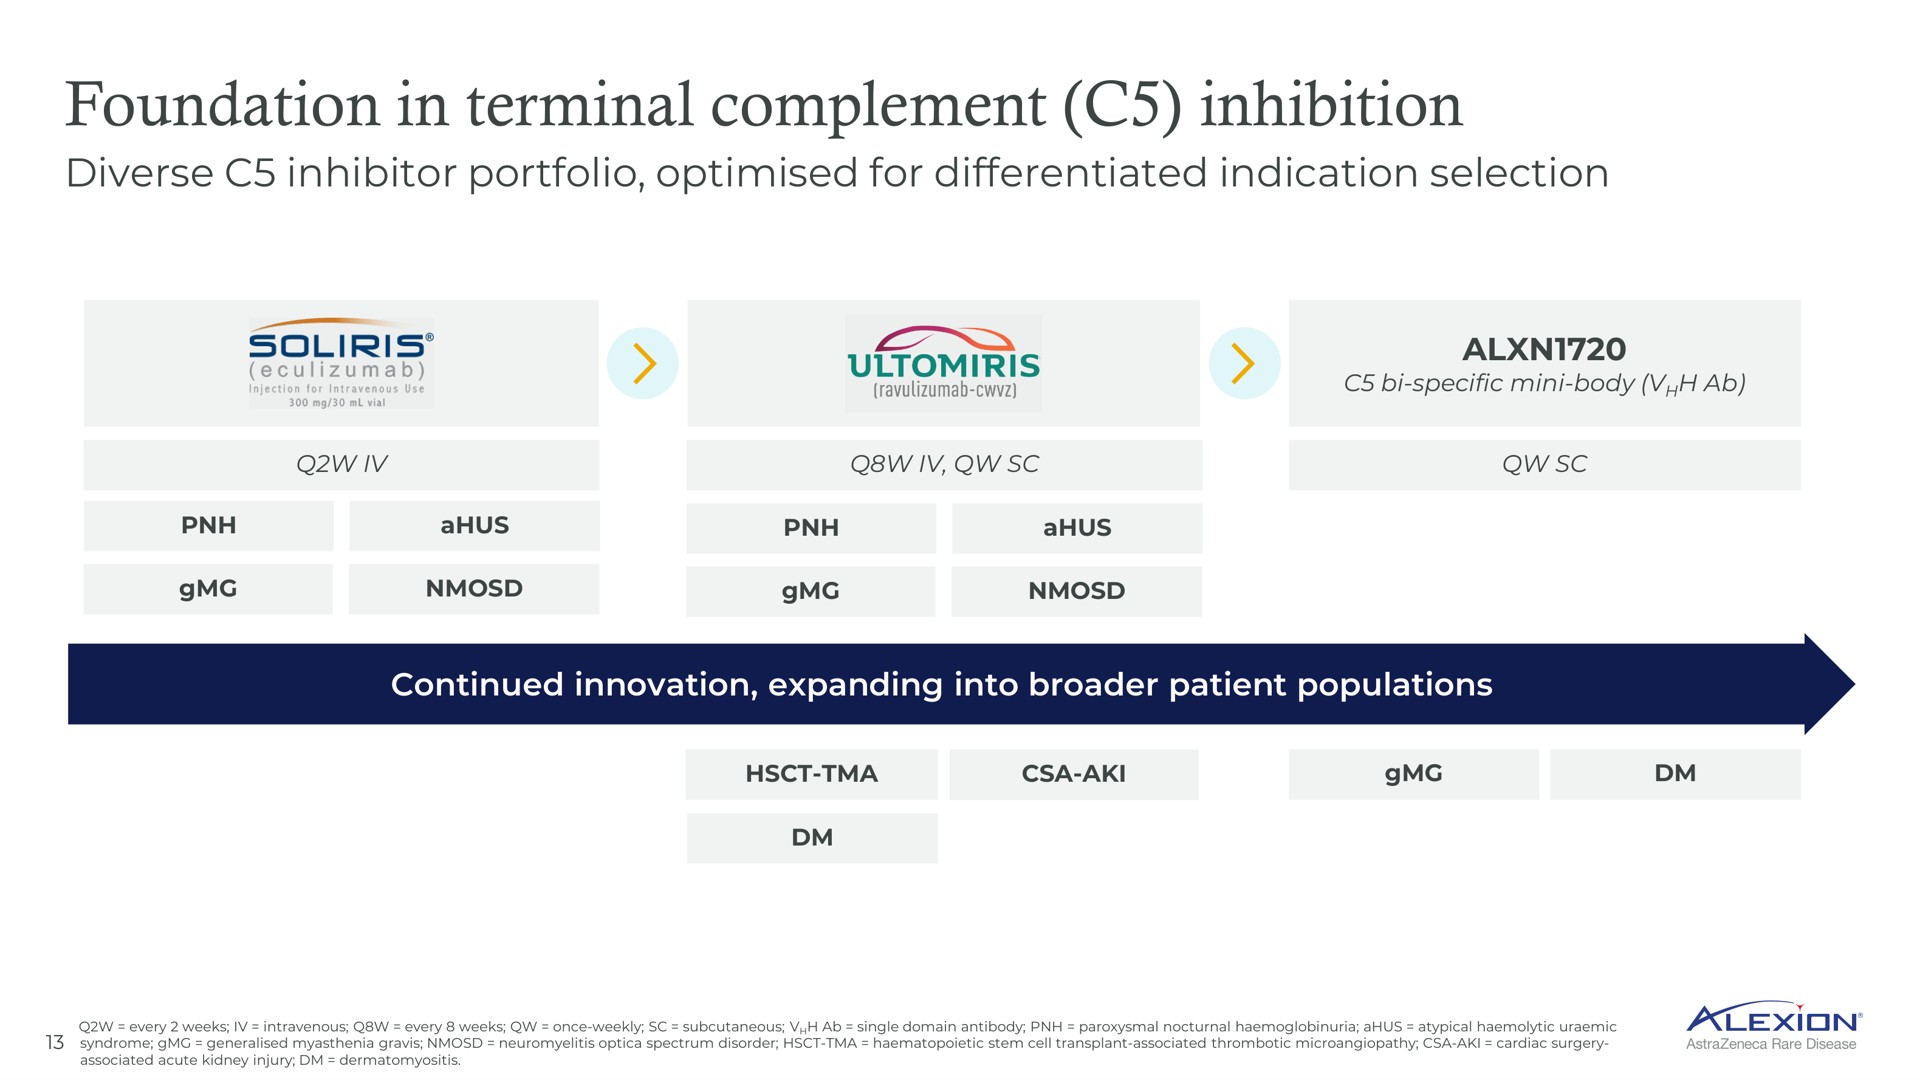 foundation in terminal complement inhibition | AstraZeneca